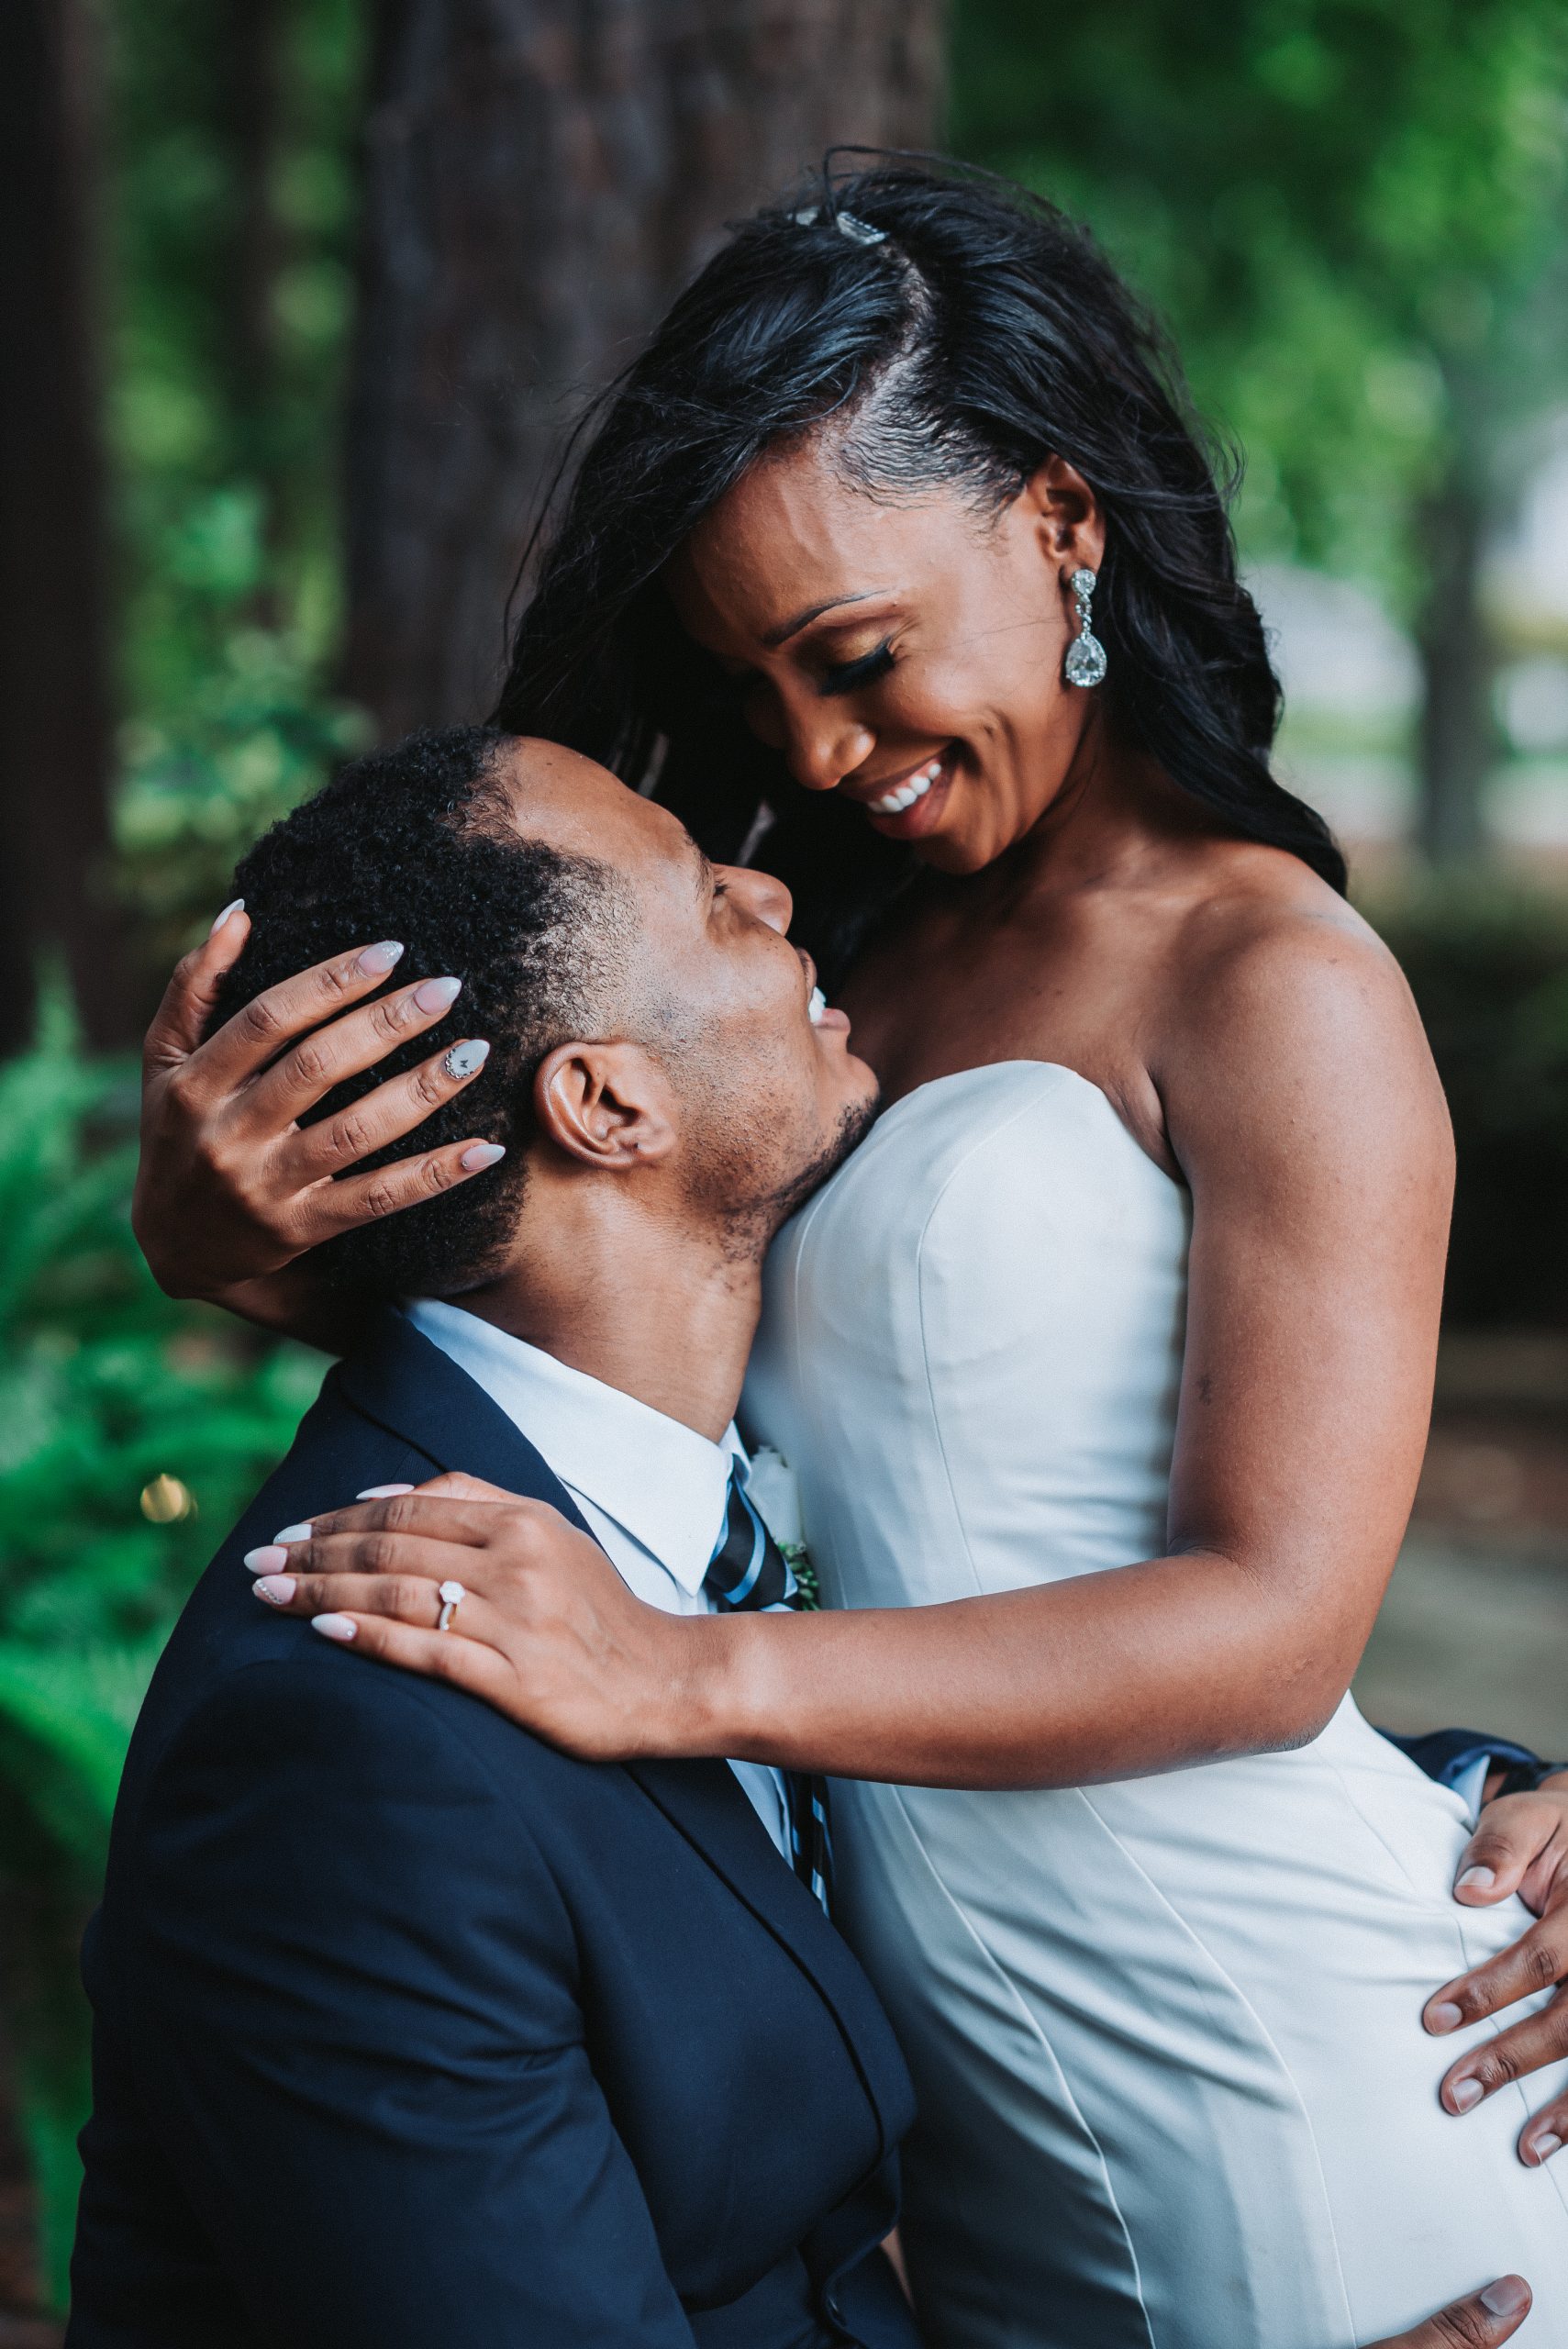 Bride and groom captured taking intimate and romantic photos on their wedding day.